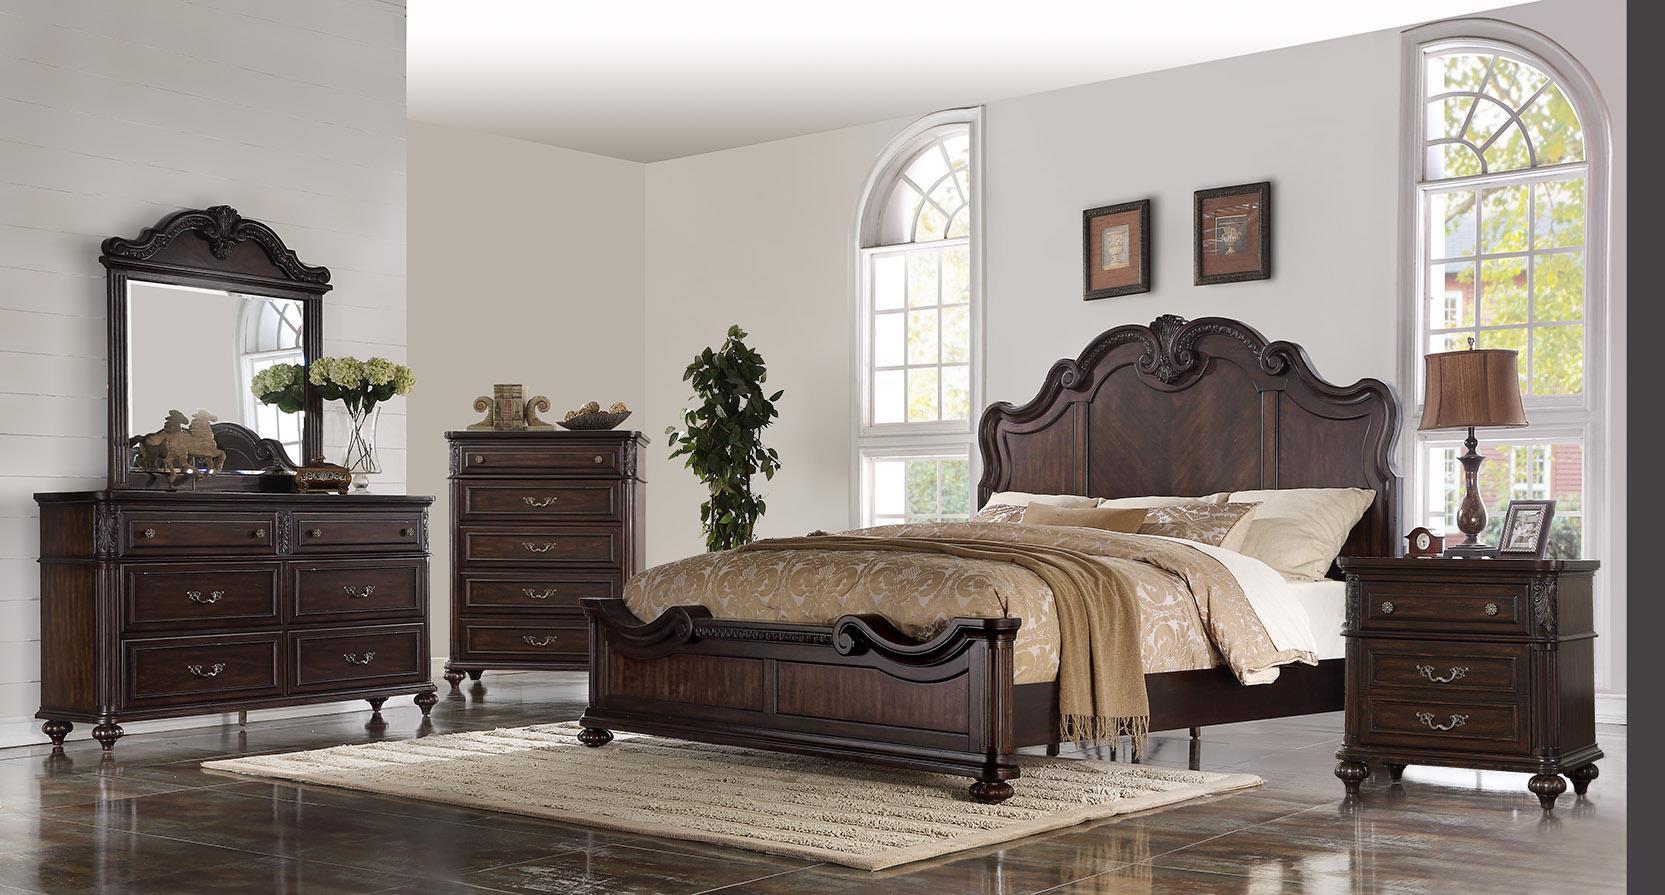 Classic, Transitional Panel Bed NOTTINGHAM 1610-110 1610-110 in Mahogany 